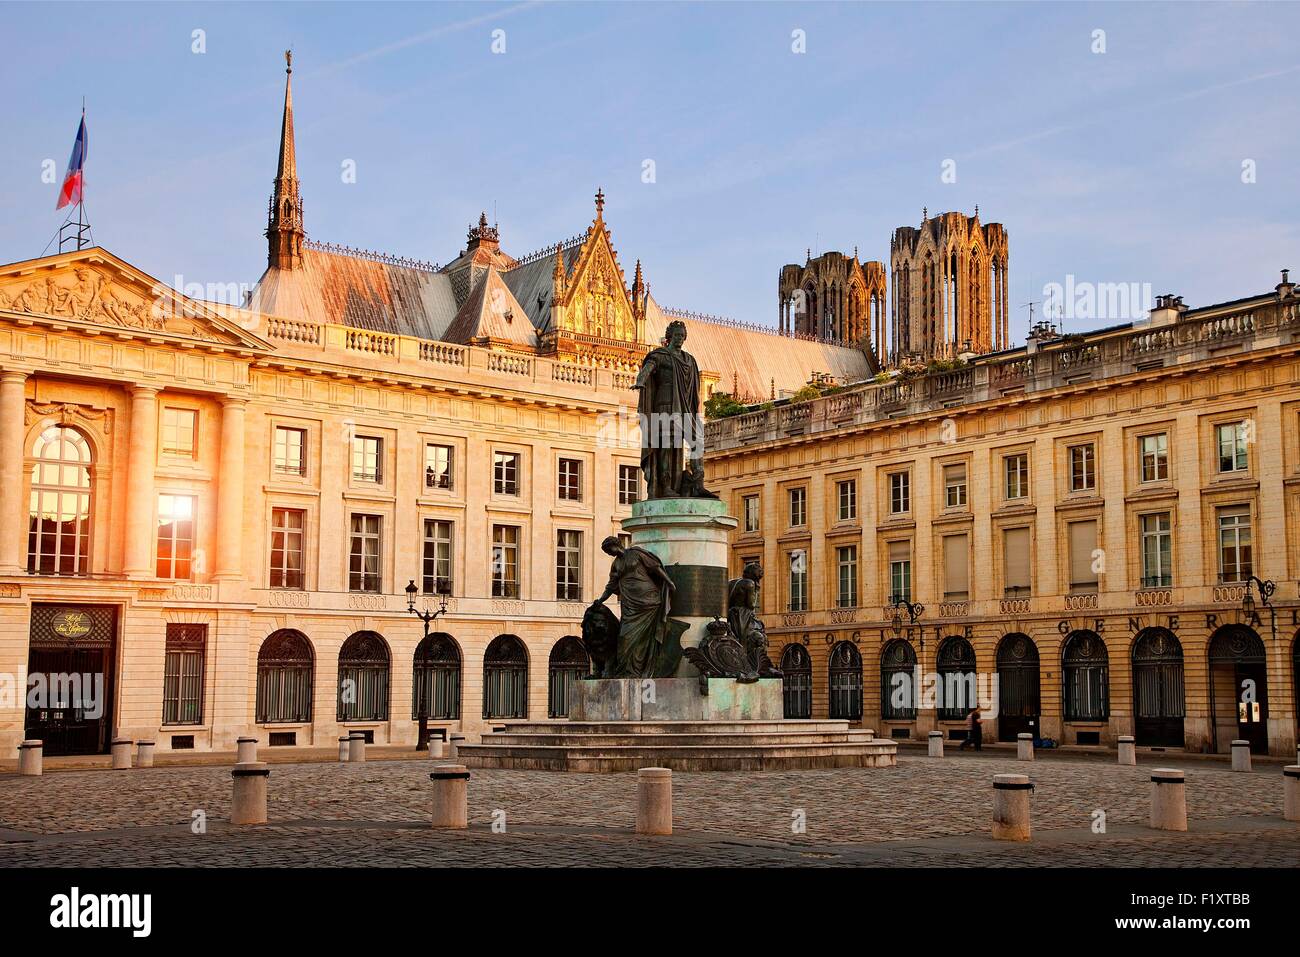 France, Marne, Reims, Place Royale (Royale Square) Stock Photo